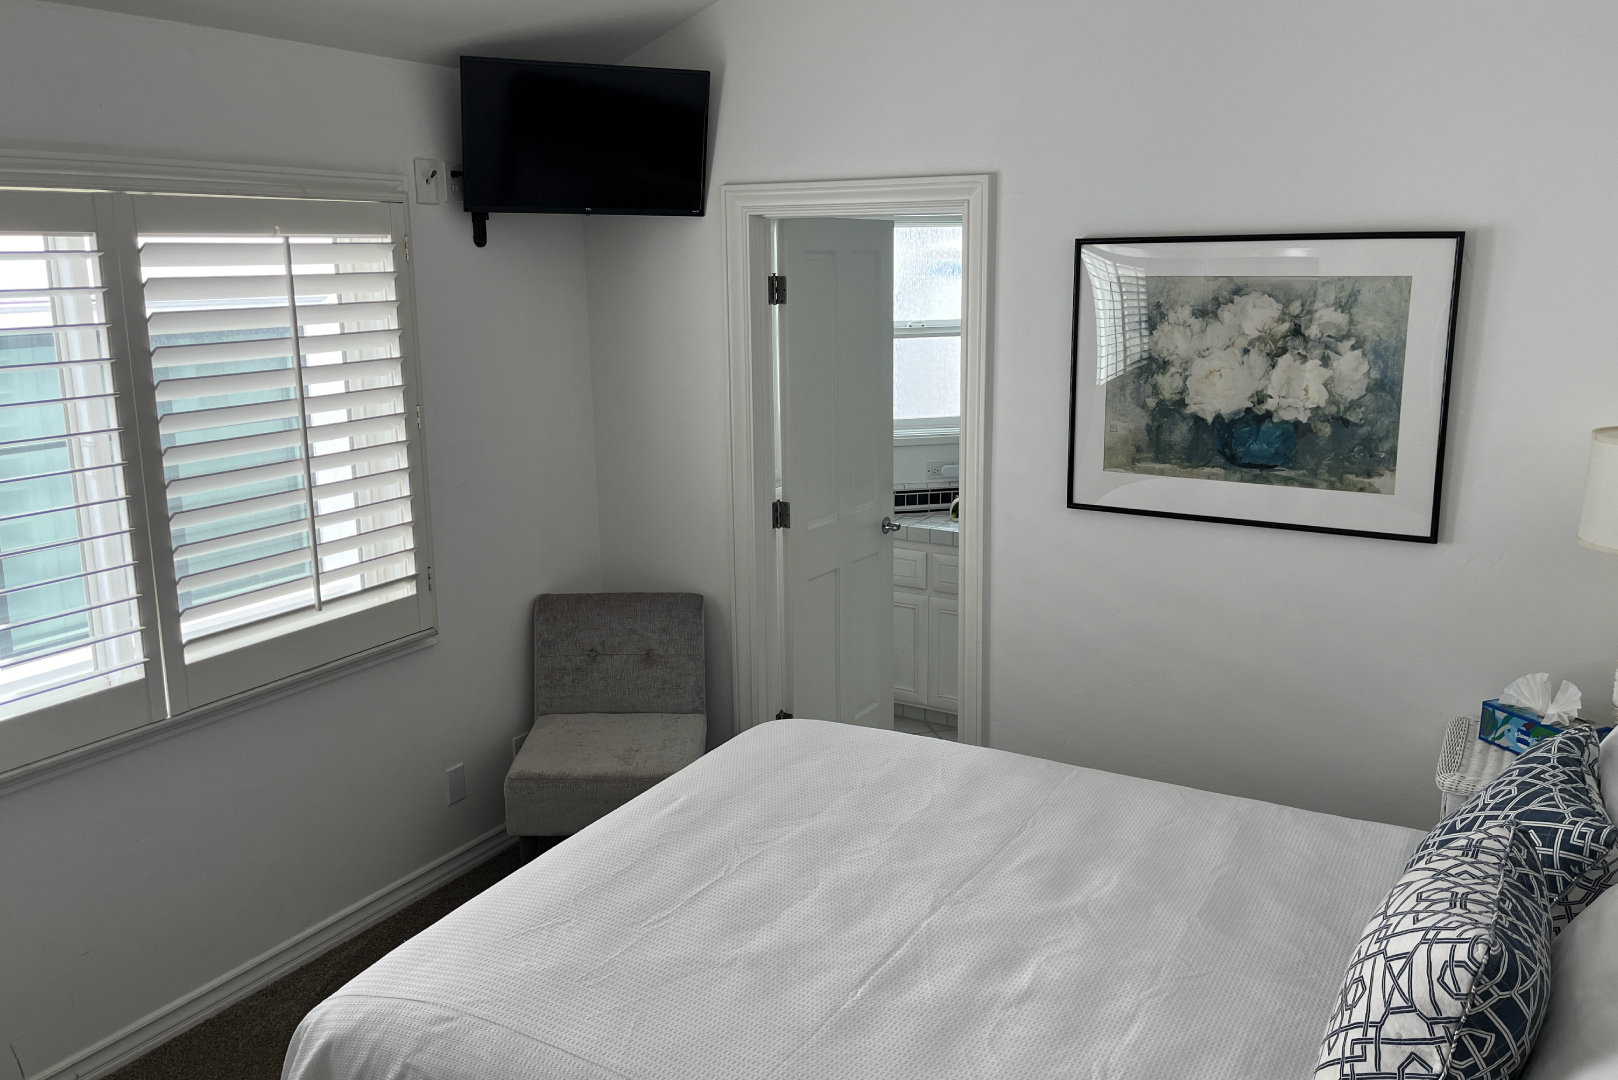 The 2nd guest room contains a queen sized bed and an attached bathroom